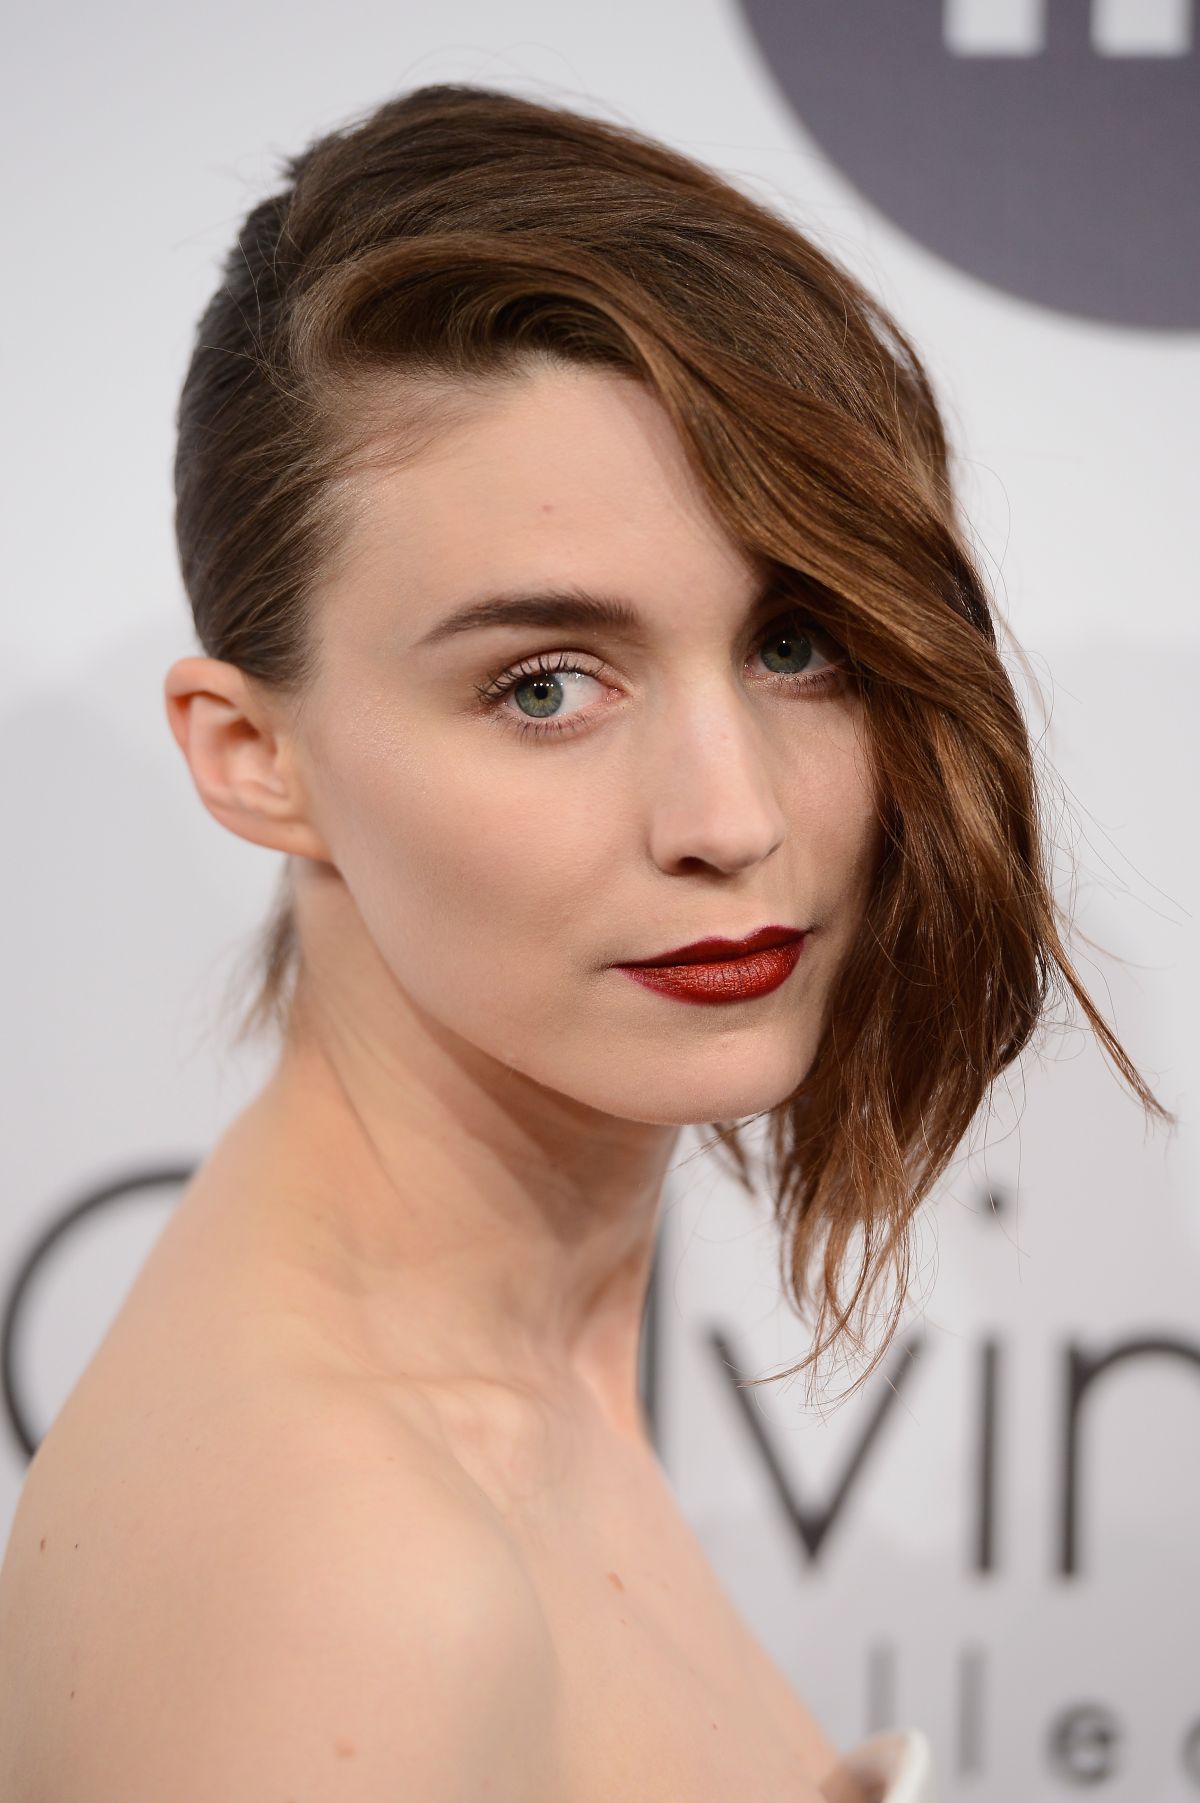 One Side Hairstyle   A New Trend From The Red Carpet